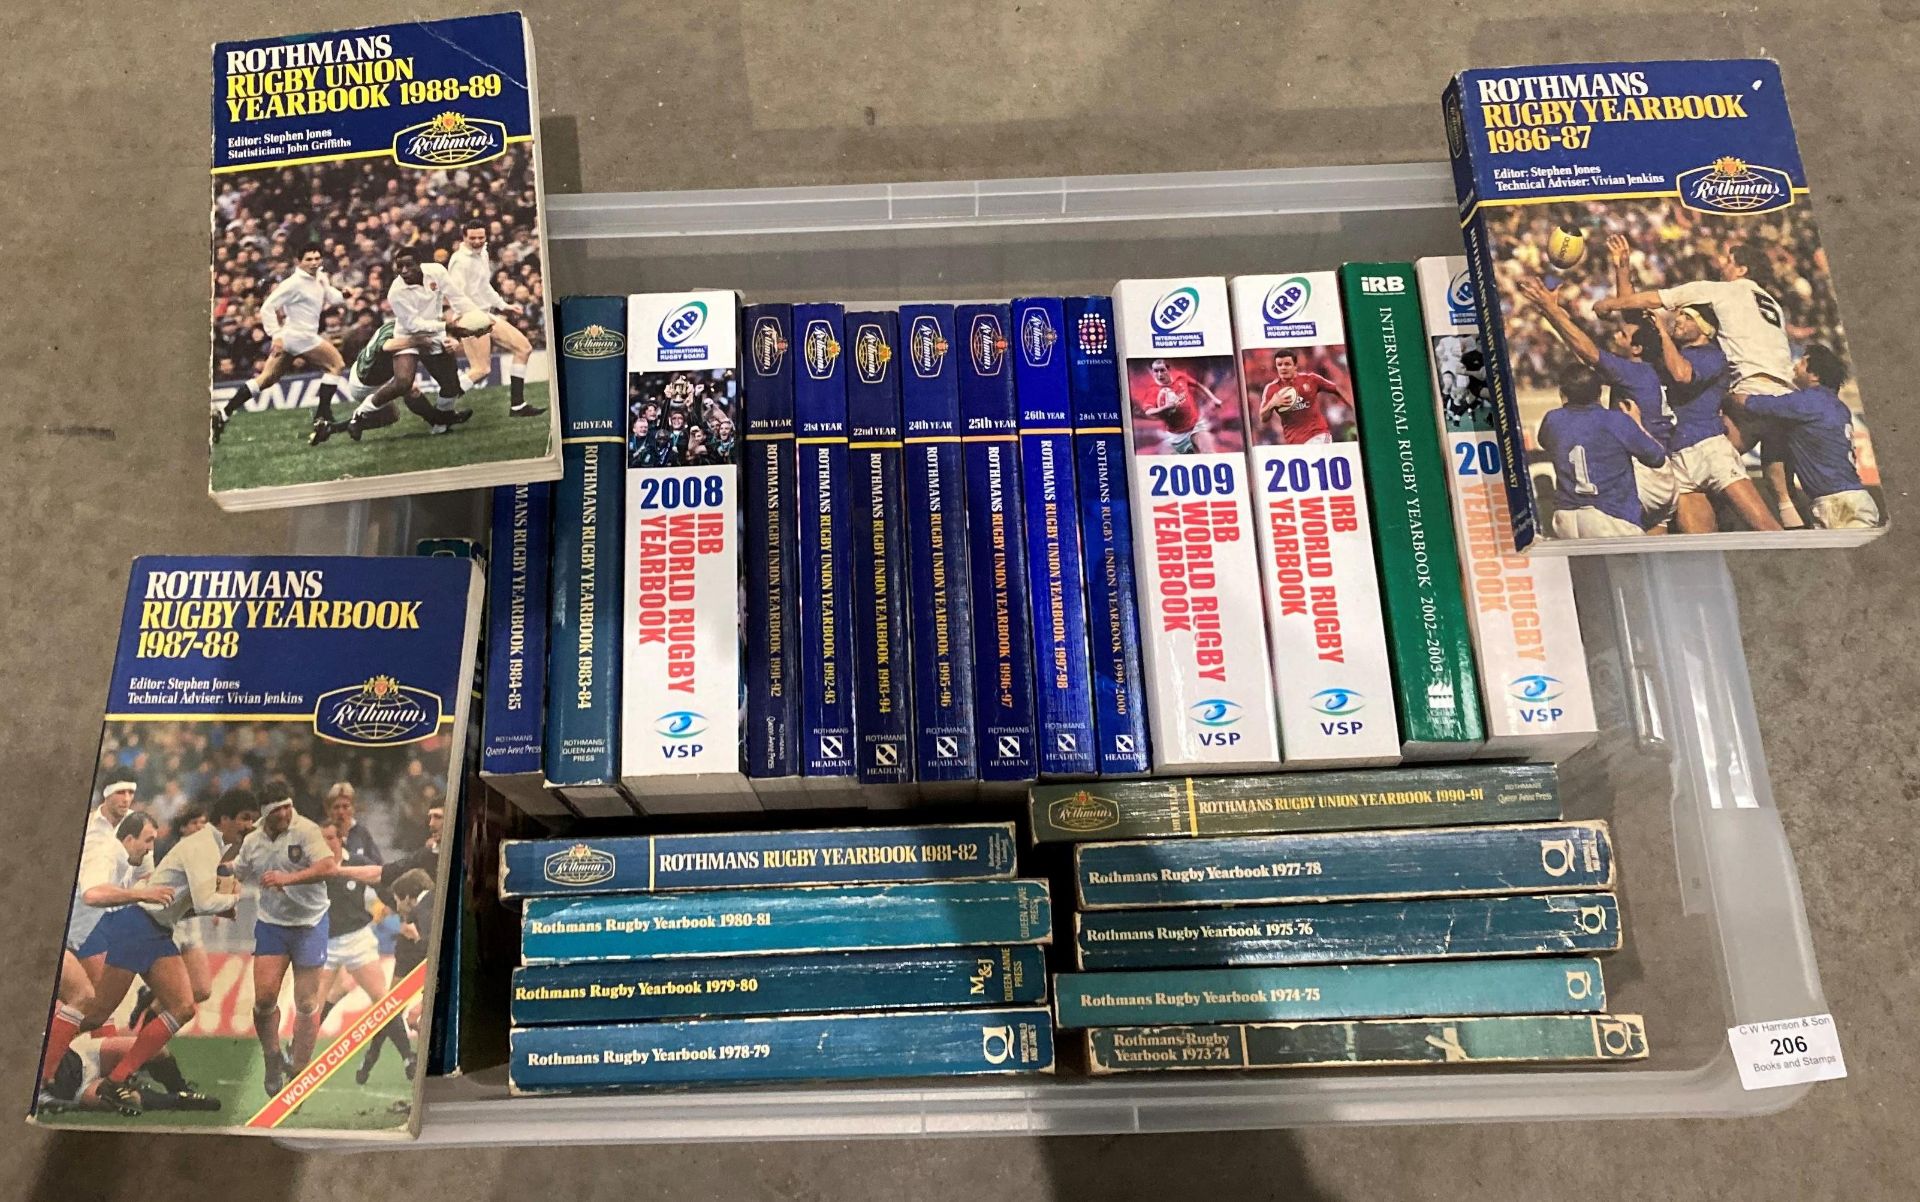 Contents to box - Rothman's Rugby Union and IRB World Rugby Year books - Rothmans circa 1970's/80's